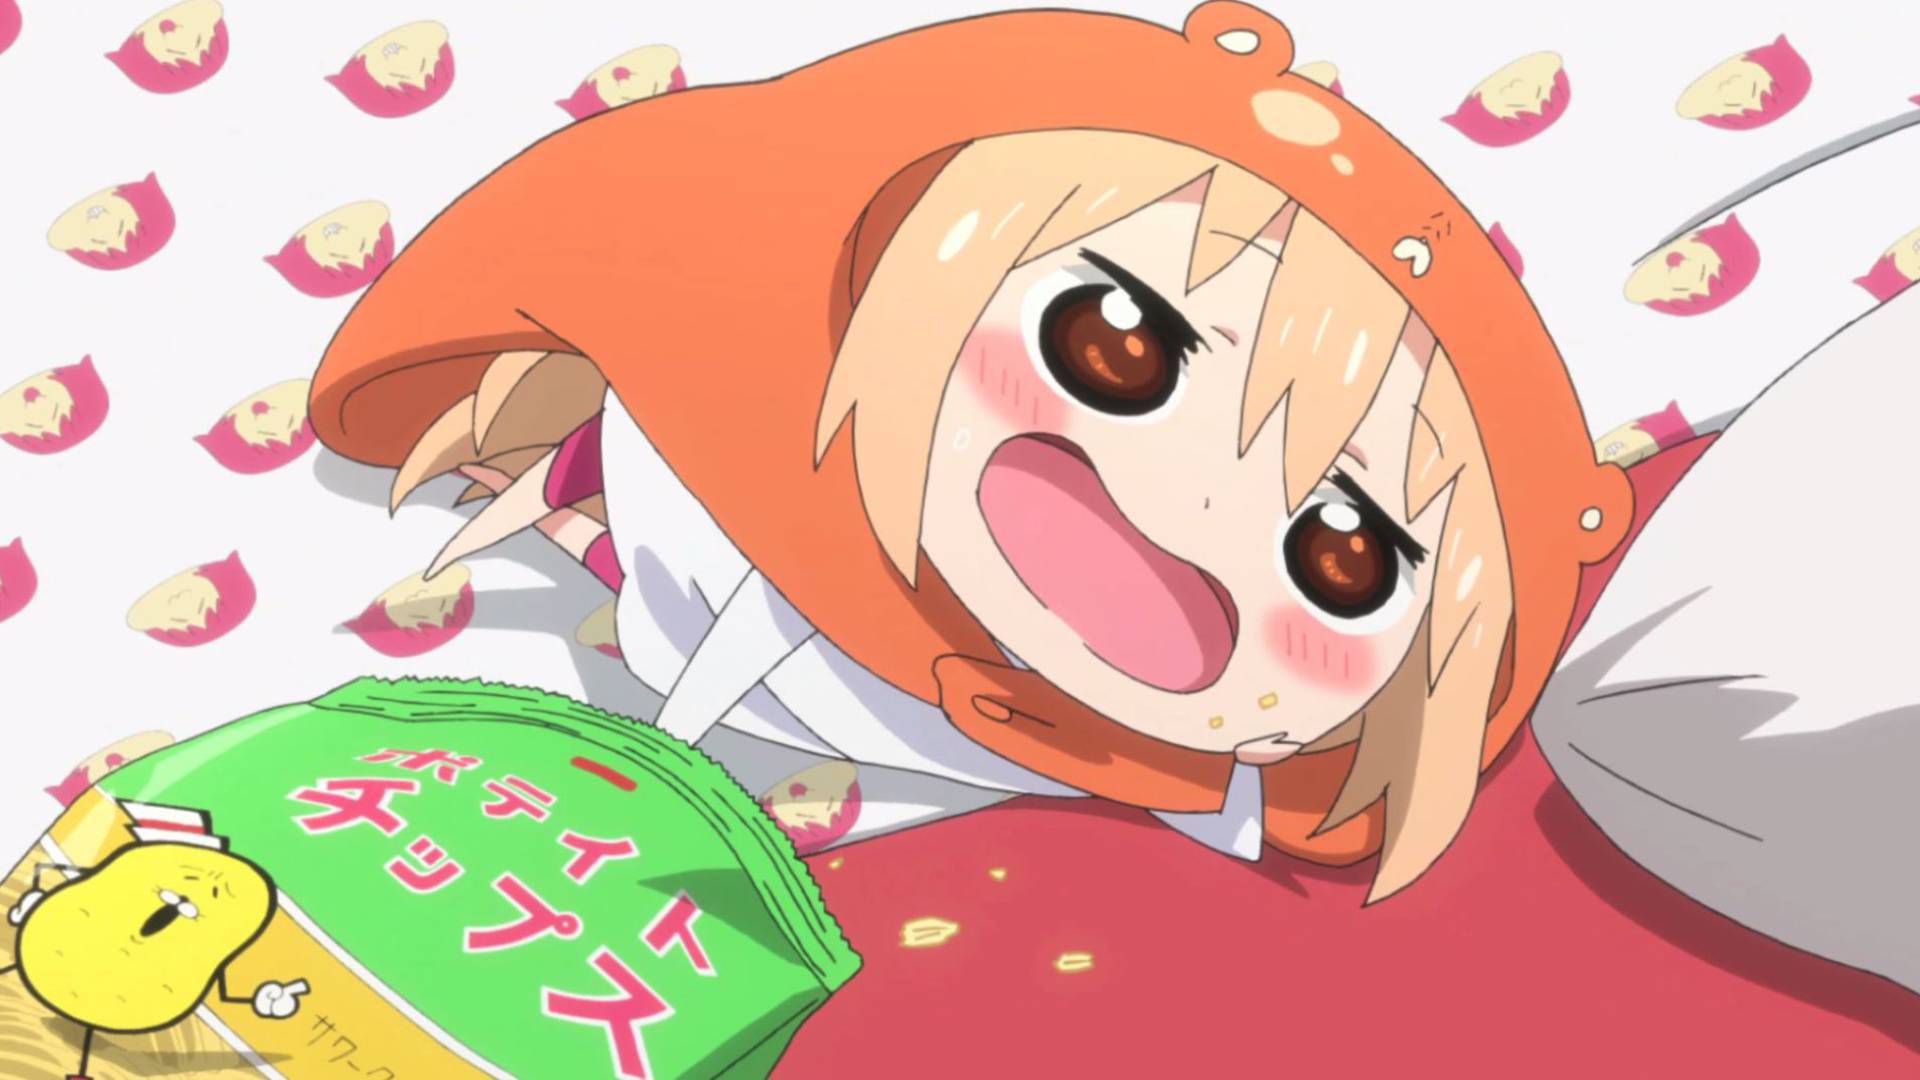 A still of the main character from Himouto! Umaru-chan laying in bed eating chips.